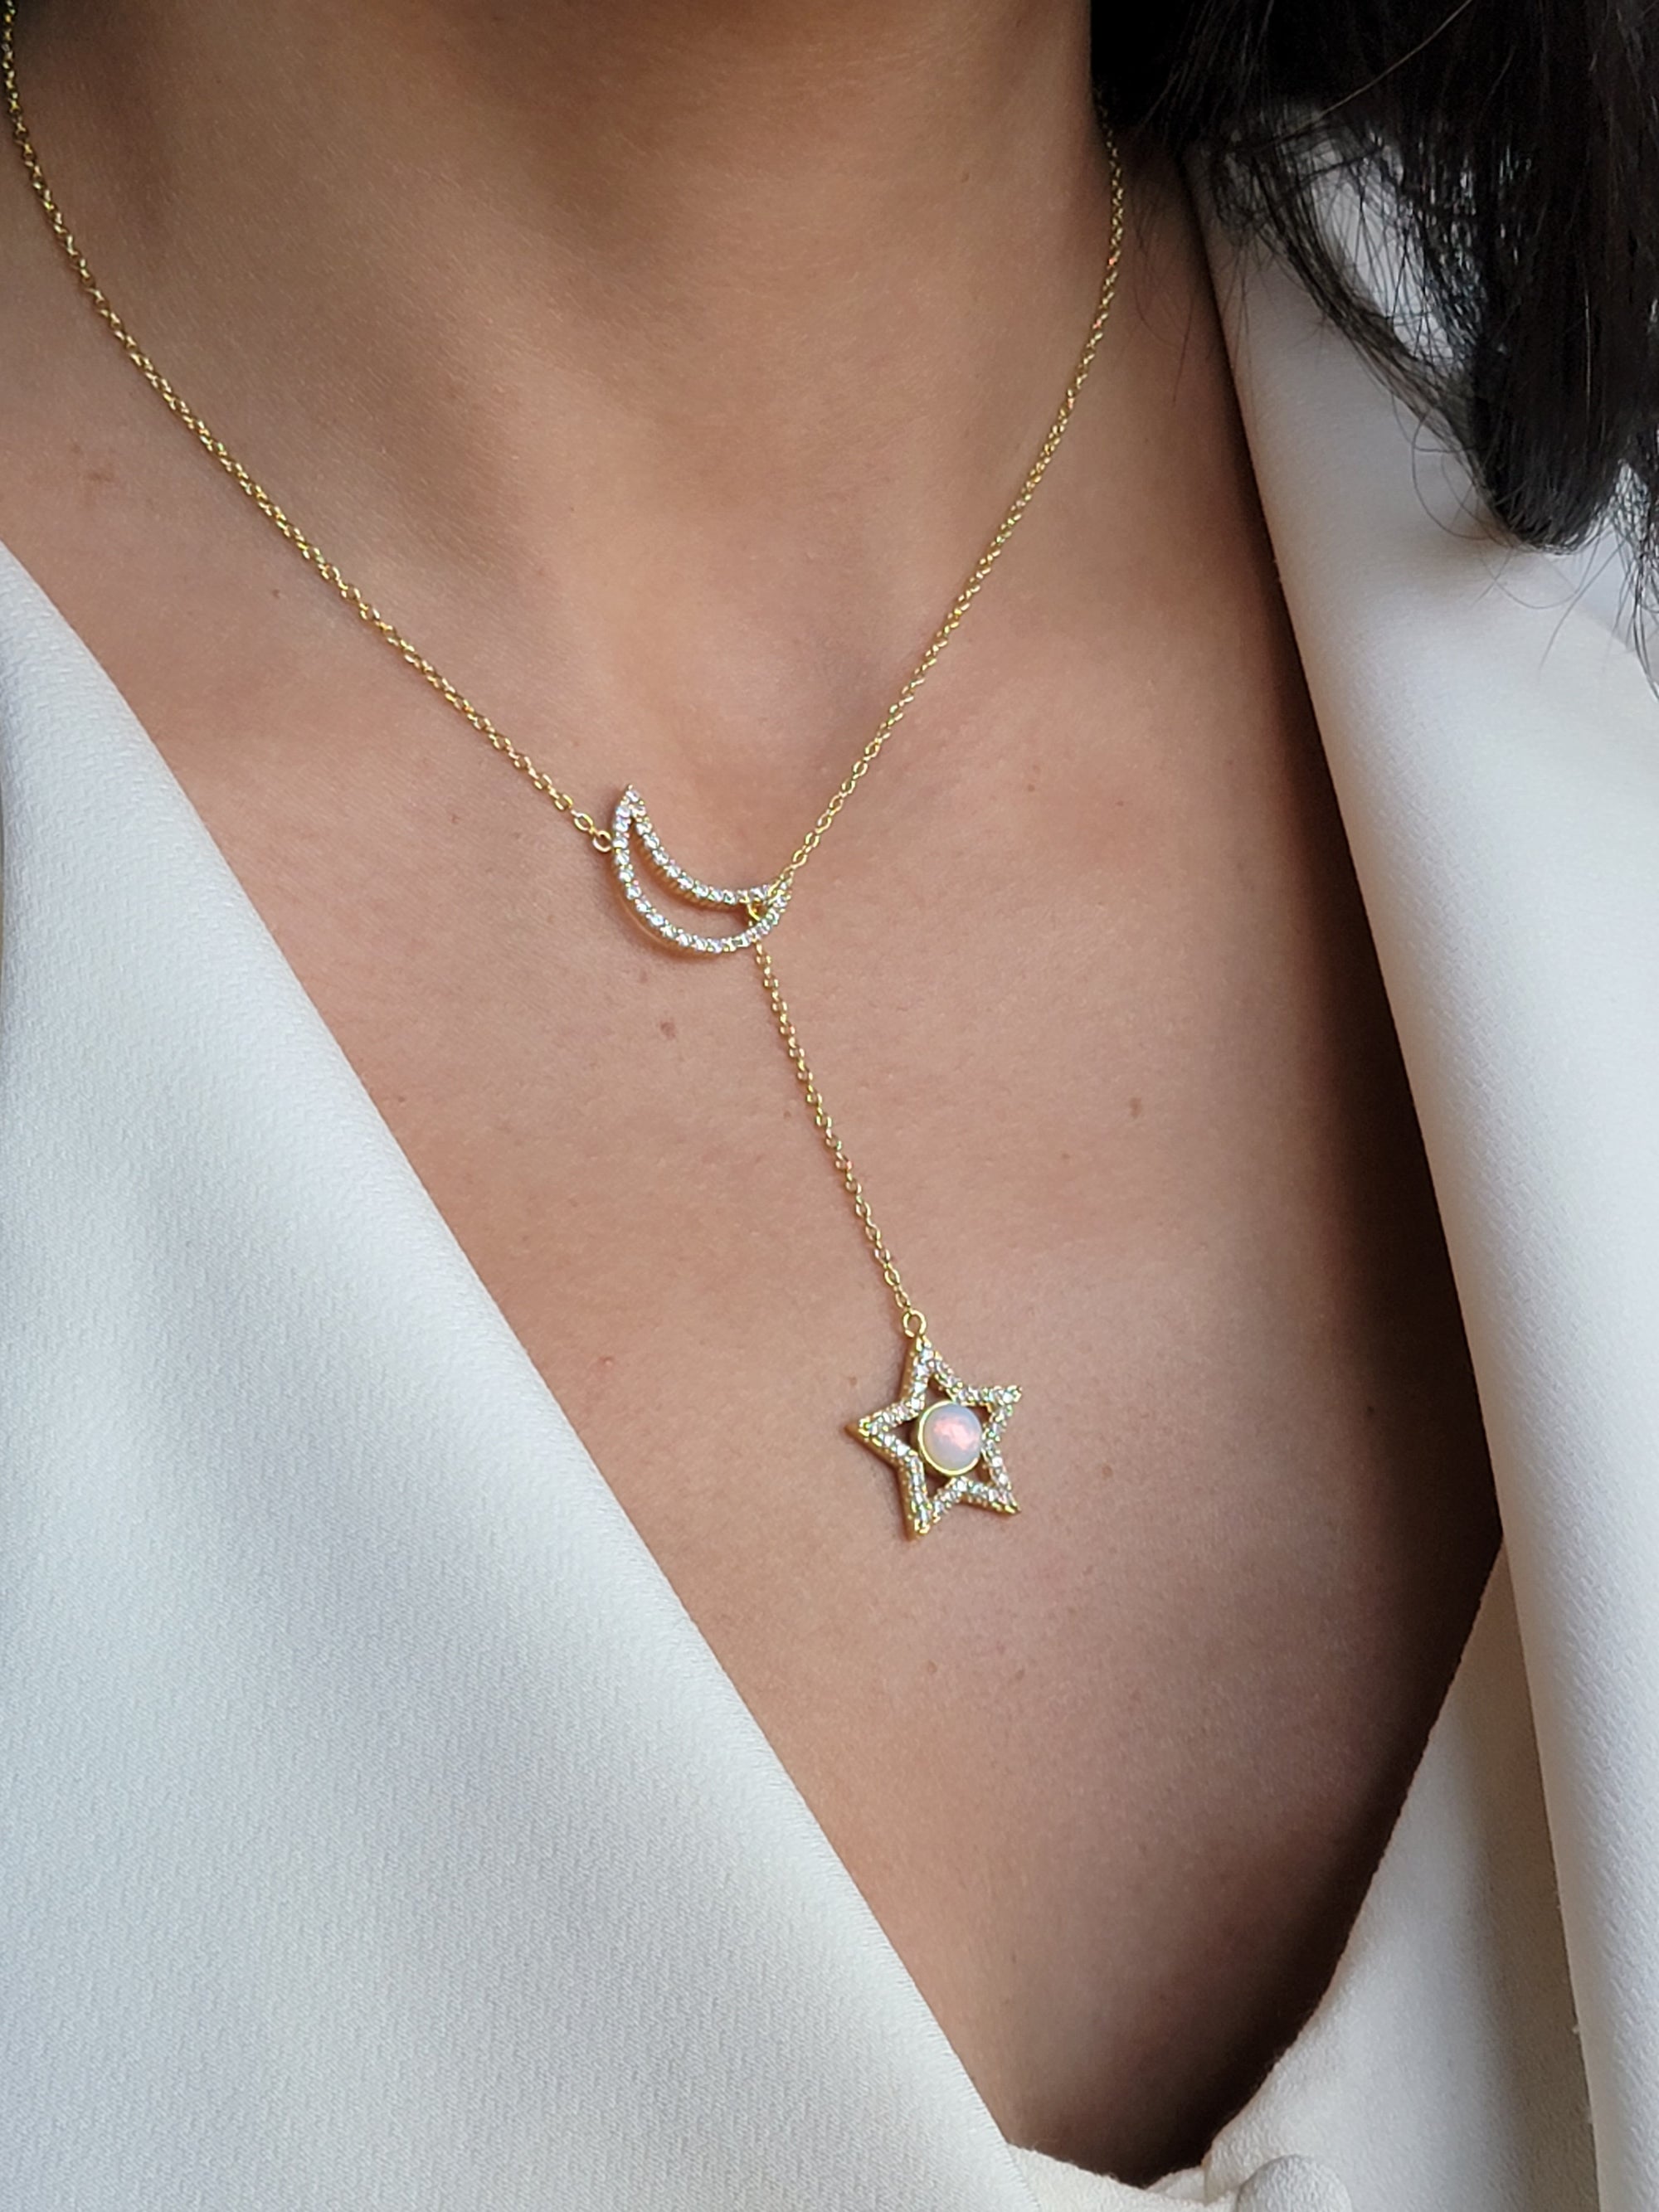 Diamond Moon and Star Necklace, White Gold Crescent Moon Pendant, Gold Diamond  Moon Jewelry, Diamond Star Necklace, Cable Chain Lobster - Etsy | Diamond  star necklace, Star necklace gold, Star necklace